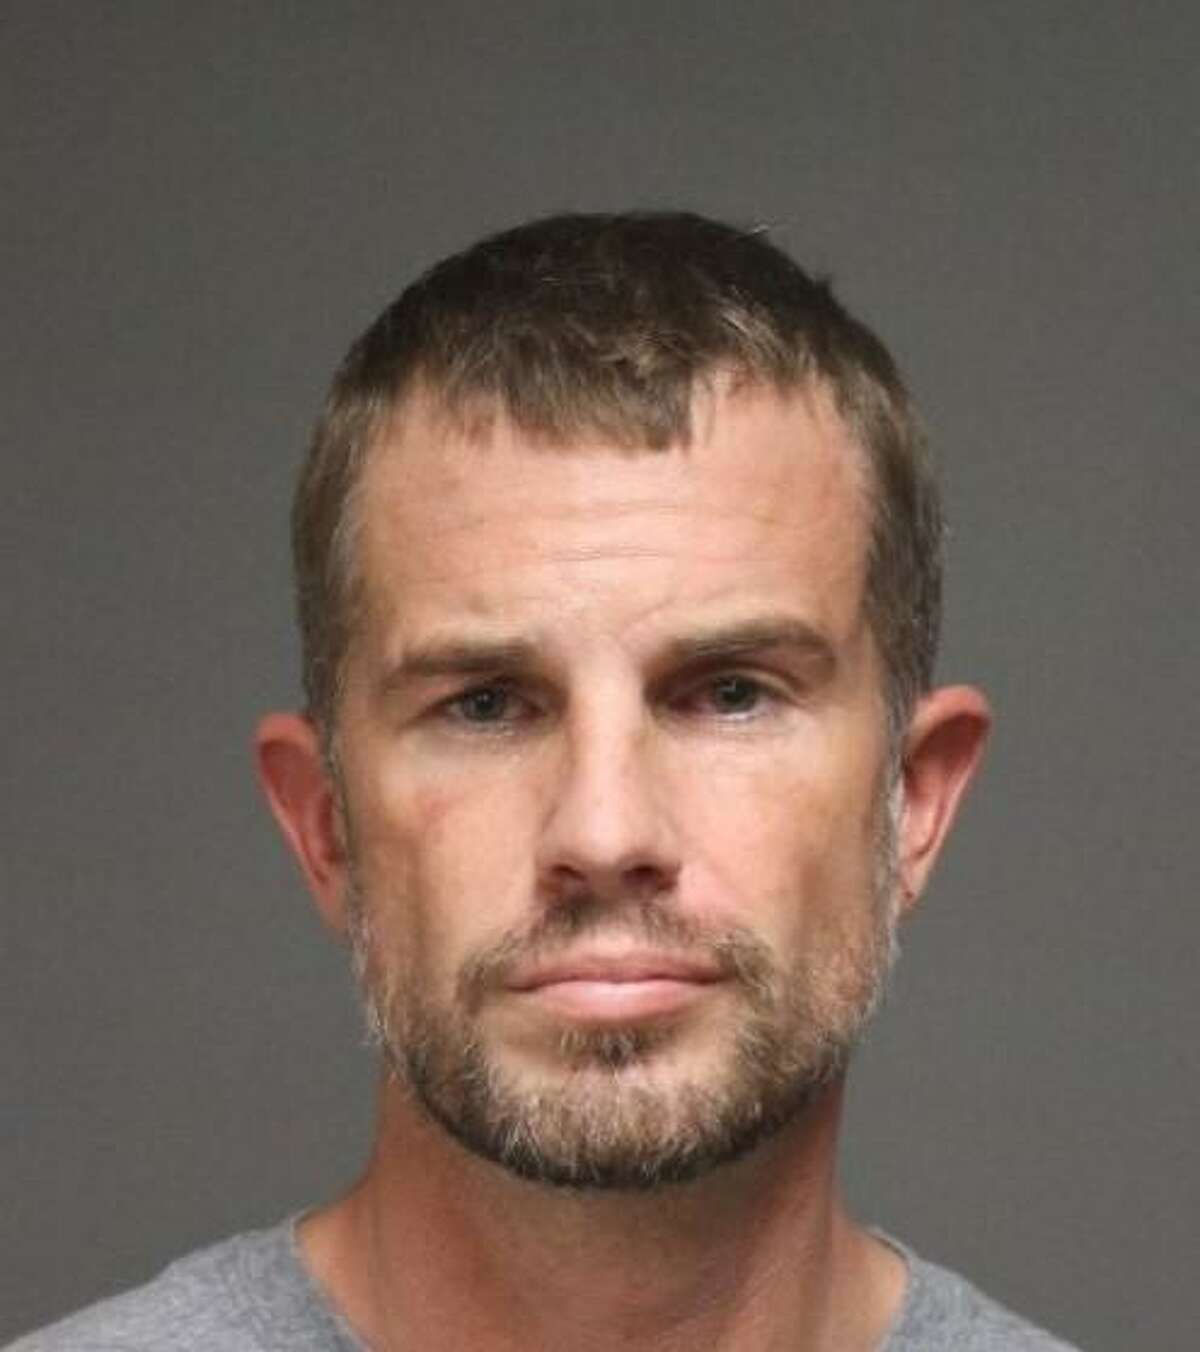 Lawrence Crook, a 37-year-old New Jersey man, faces a number of charges after being arrested twice in the same day.